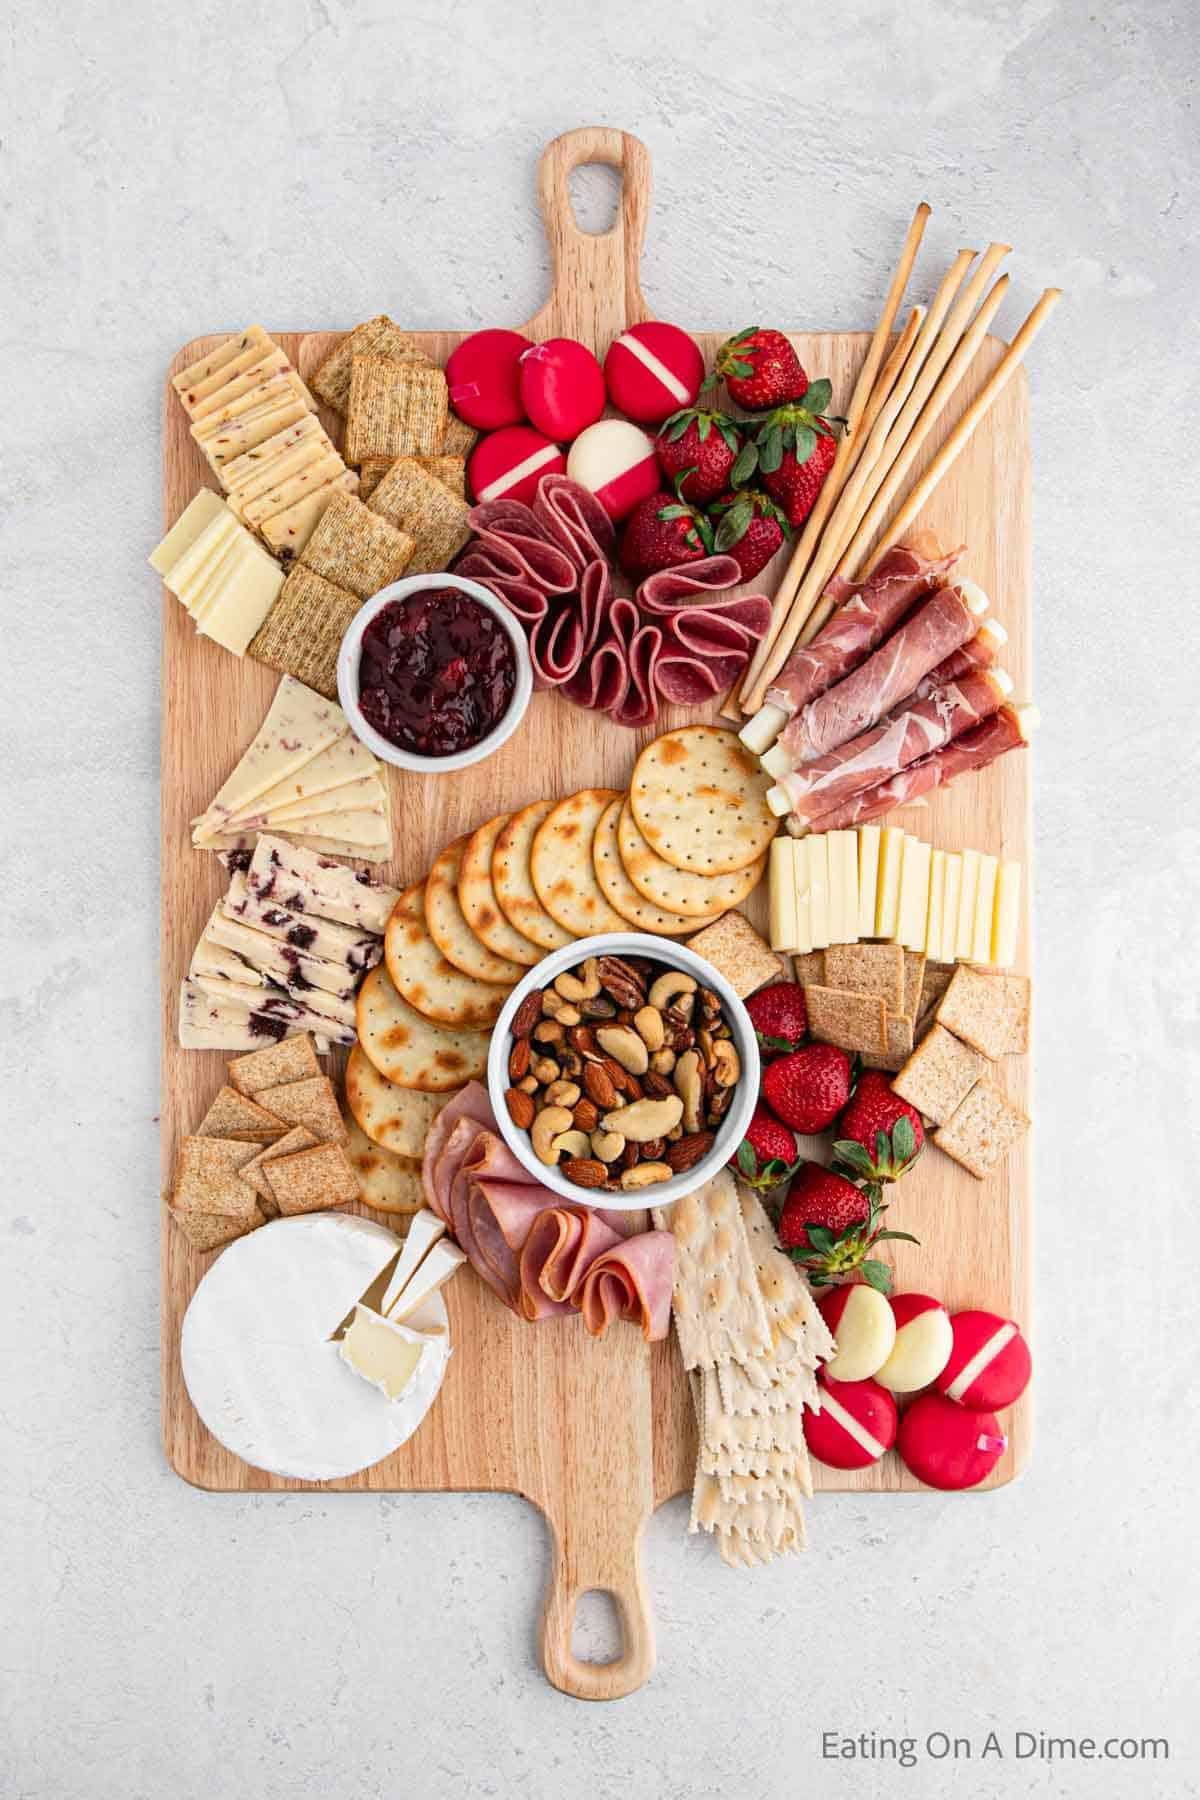 Placing cheese, crackers, meats on the charcuterie board